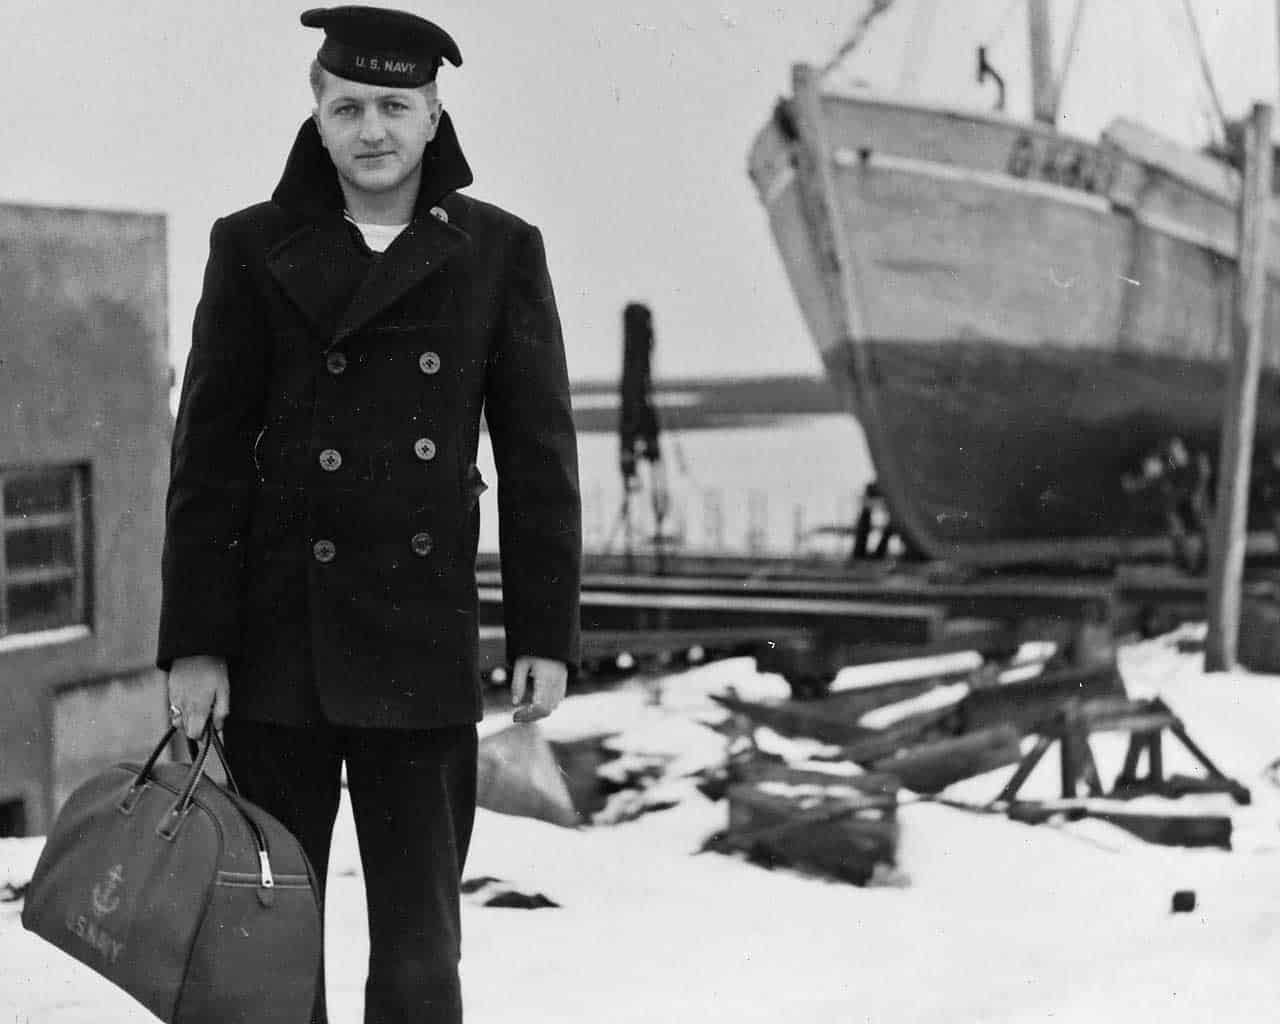 vintage photo of navy sailor wearing a pea coat